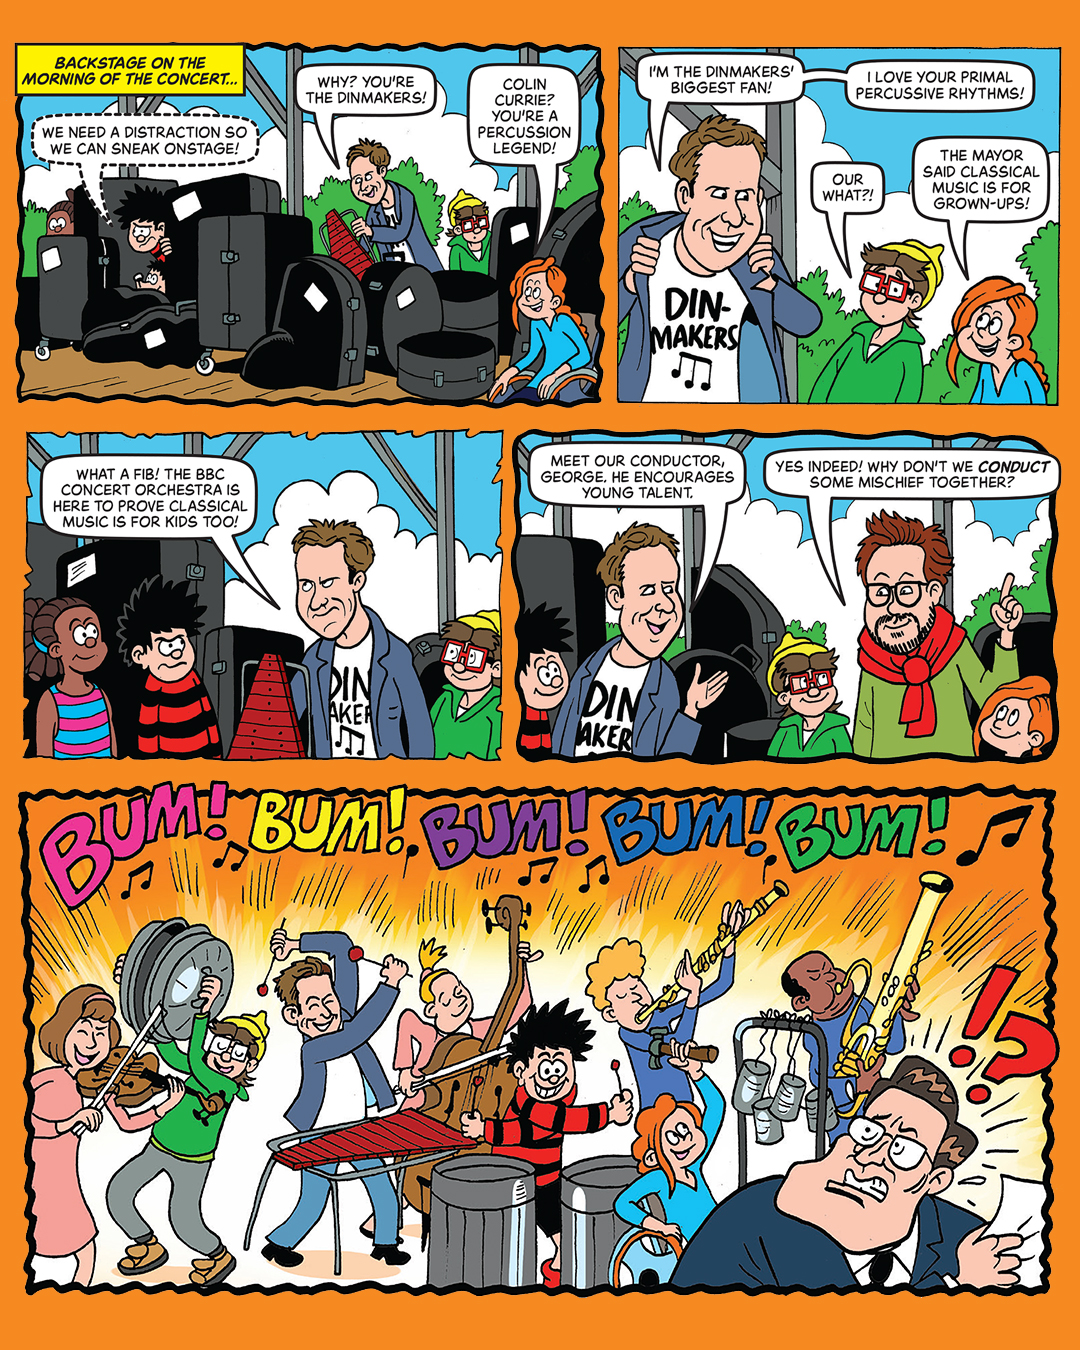 Beano comic strip featuring Colin Currie and George Morton